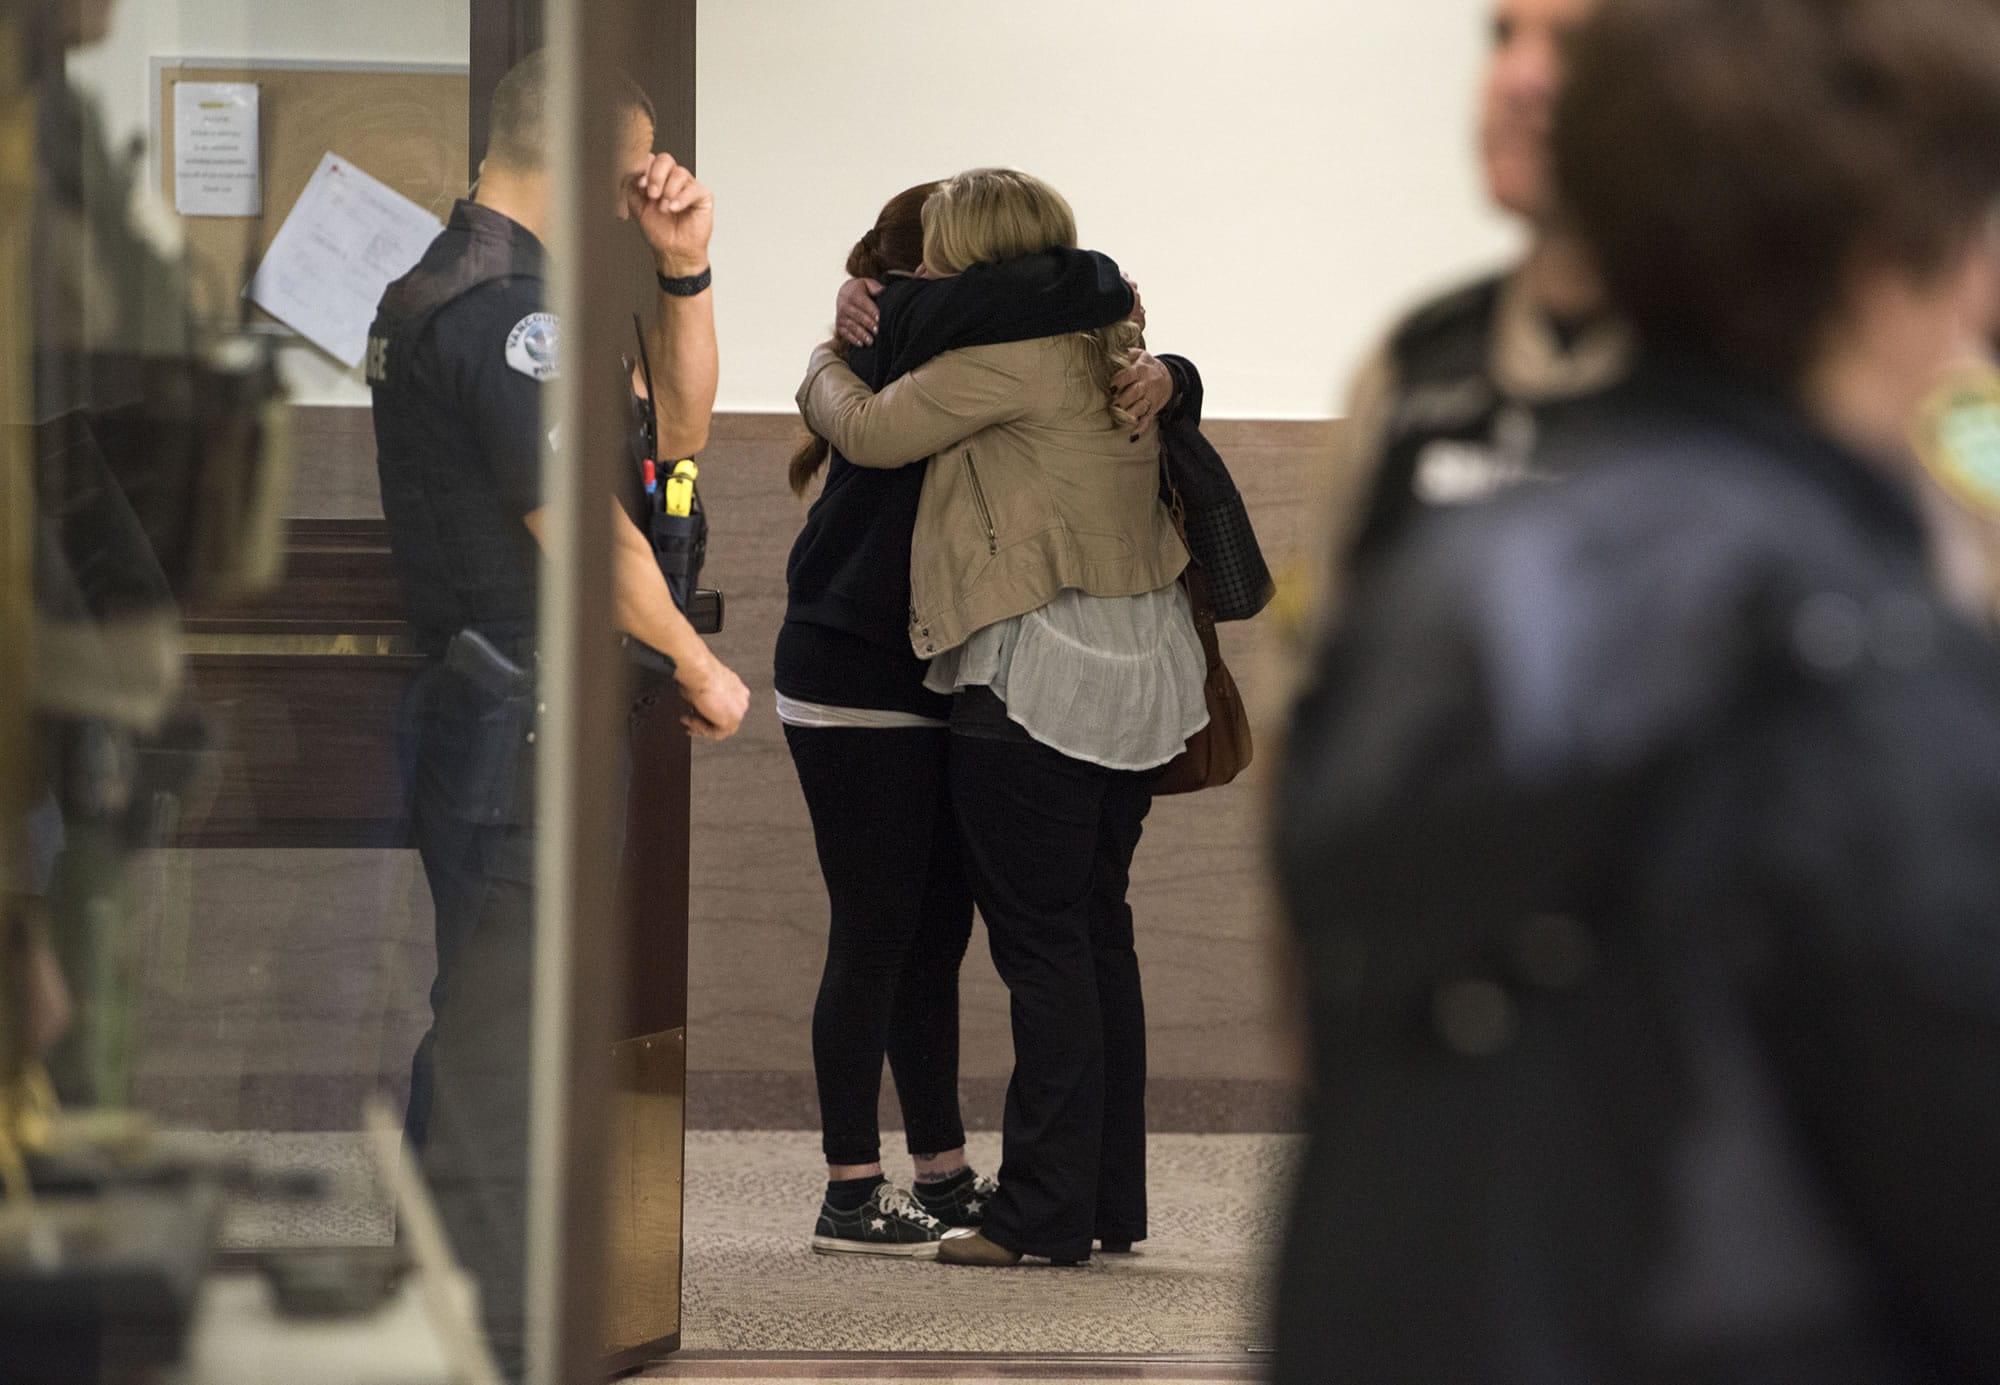 Abia Nunn embraces Heidi Gowing after Brent Luyster was found guilty on all counts in a triple aggravated murder trial in Clark County Superior Court, Friday morning, Nov. 17, 2017. Nunn is the sister of Joseph Mark Lamar, whom Luyster was found guilty of fatally shooting.